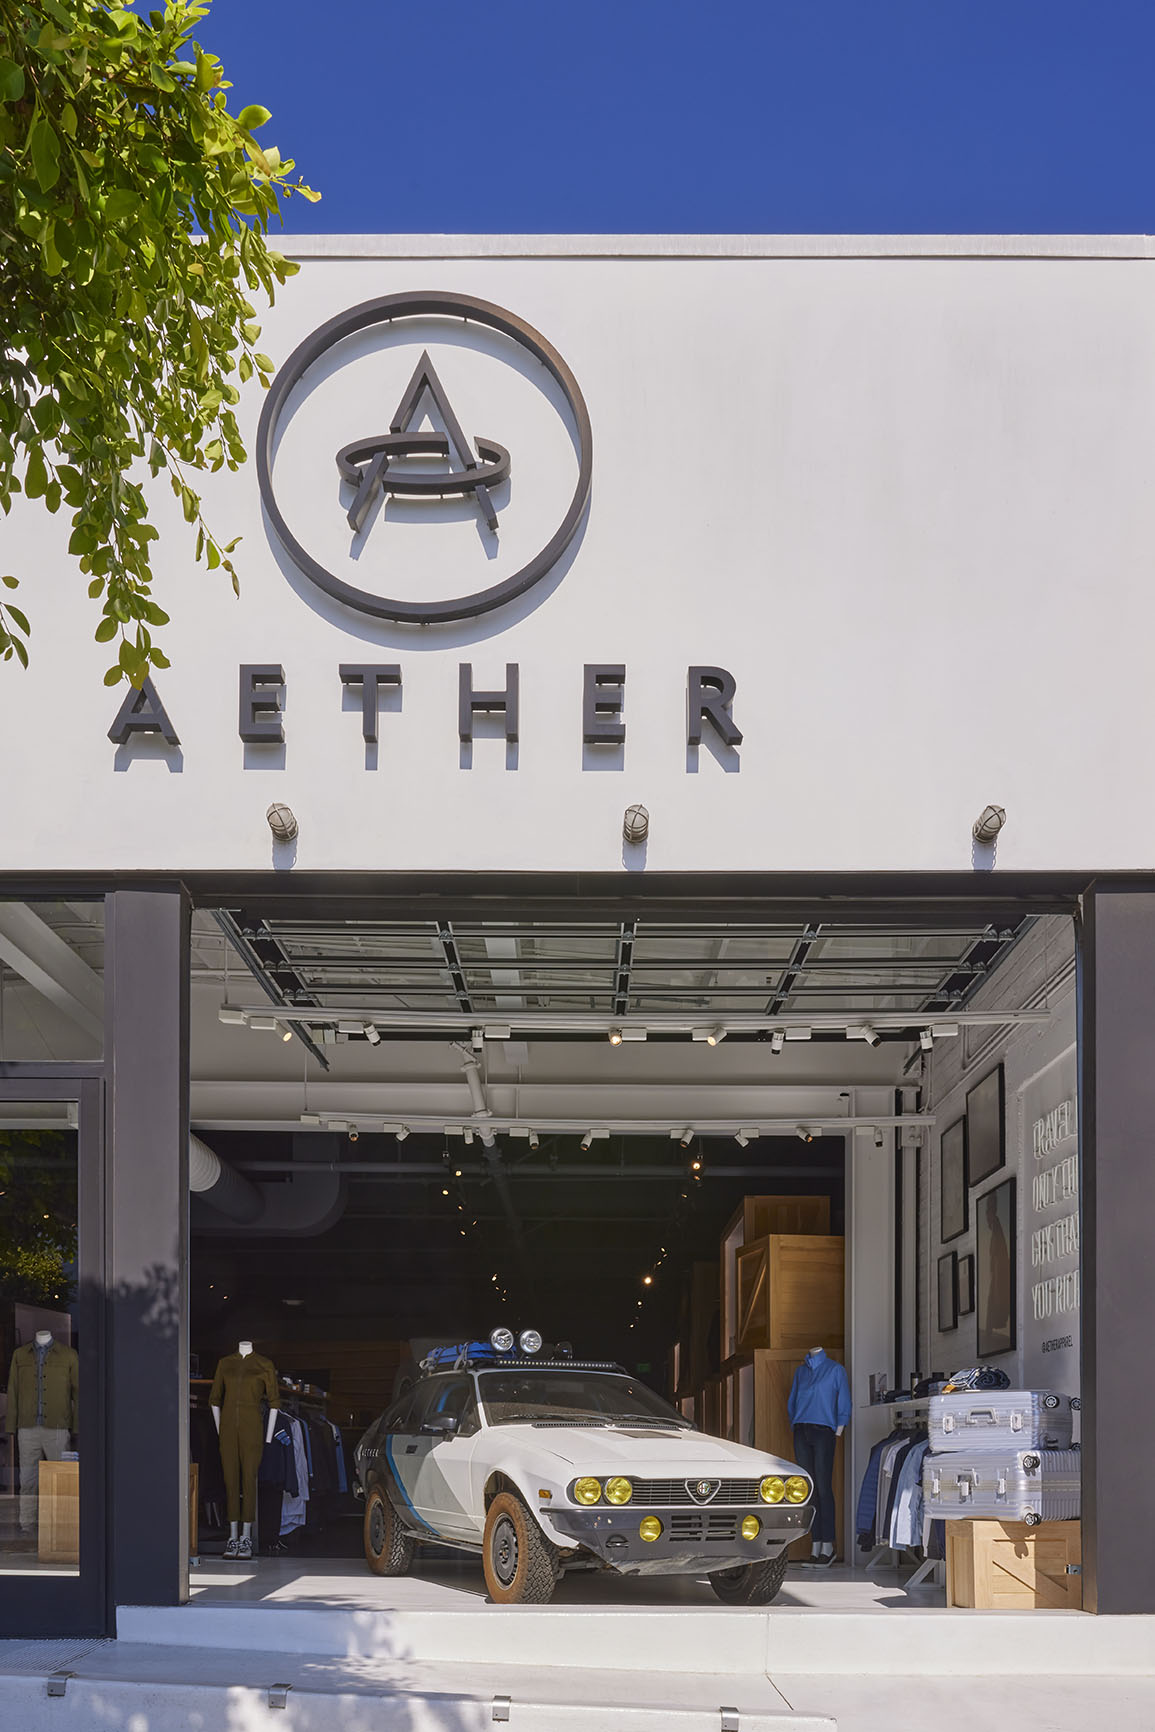 assembledge, aether, aether apparel, retail design, store design, los angeles architecture, commercial architecture, retail architecture